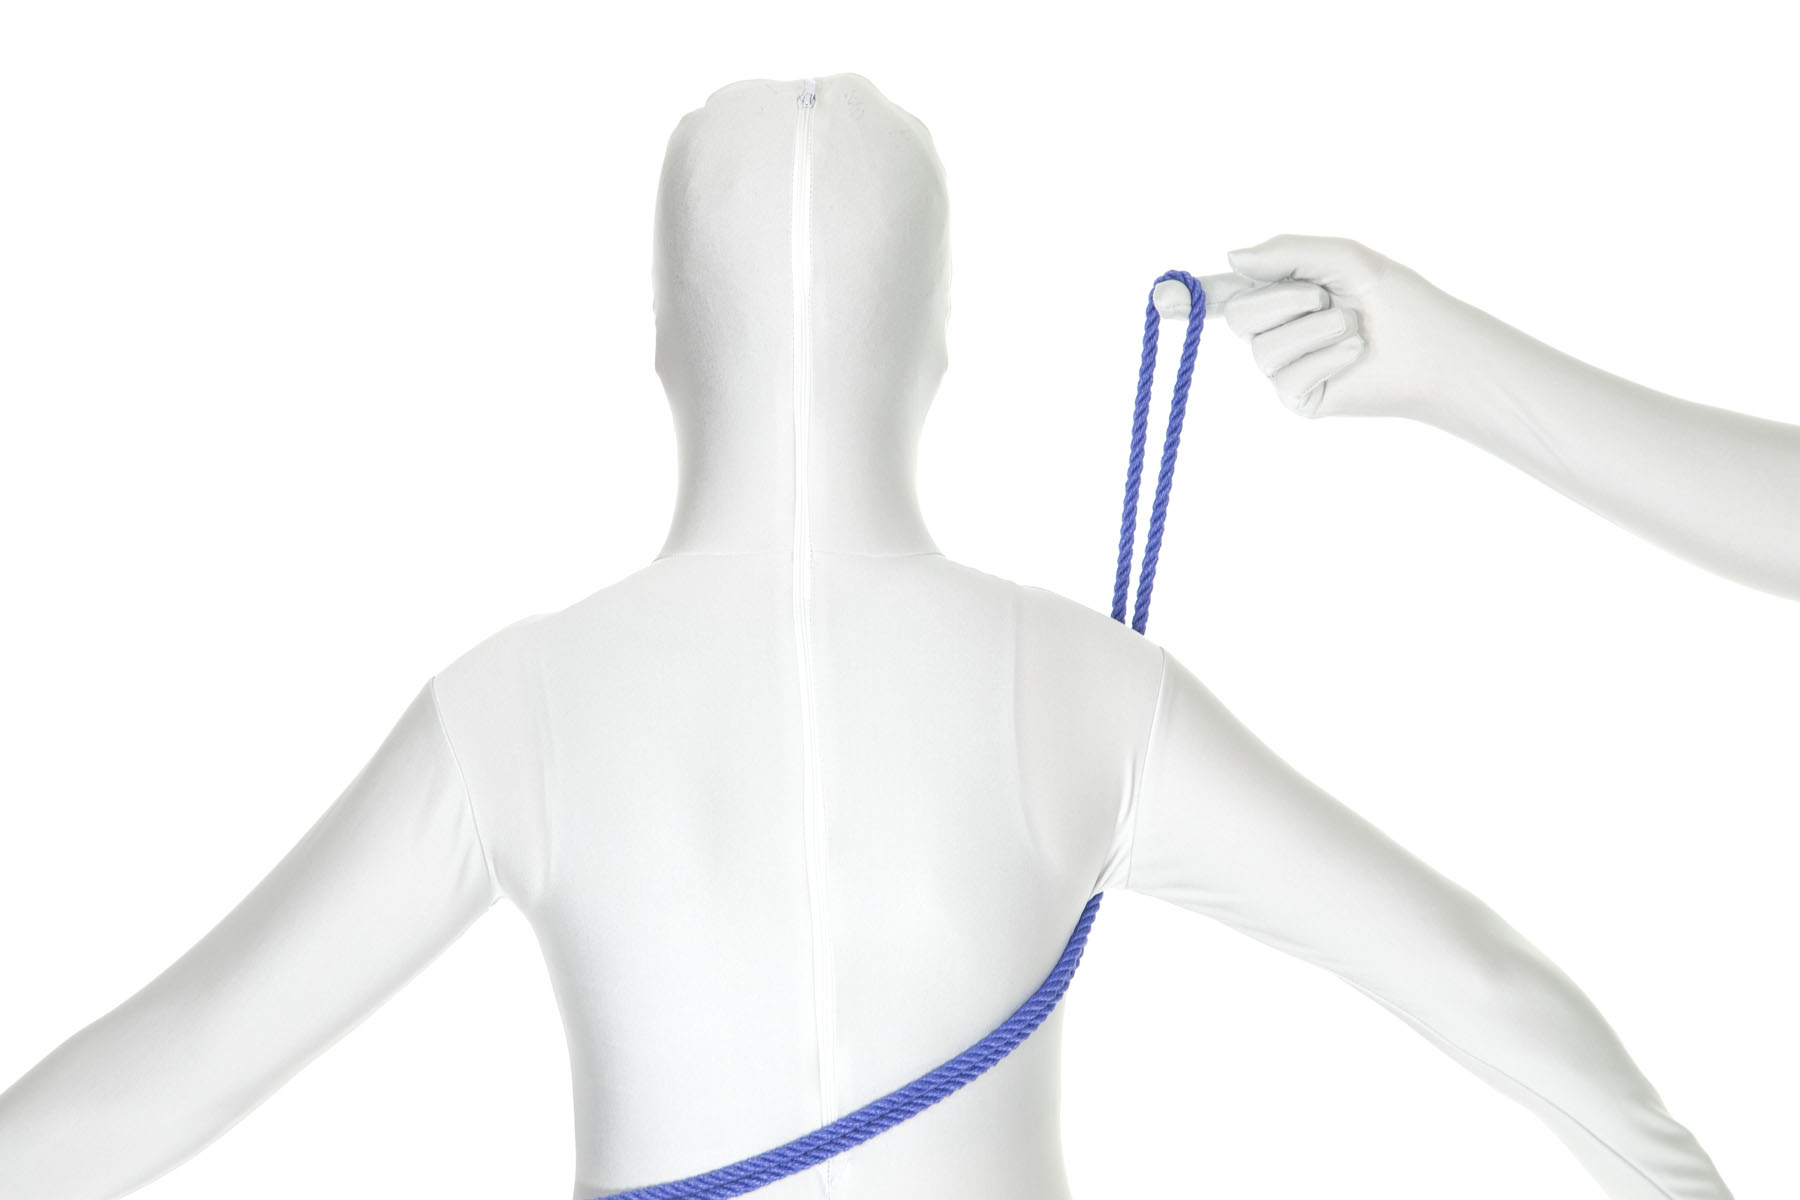 A rear view of a person in a white bodysuit with their arms straight and slightly raised to their sides. The bight of a doubled blue rope crosses diagonally from left to right up their back, and goes under their right armpit. The bight is held above and in front of the right shoulder by the rigger’s index finger.